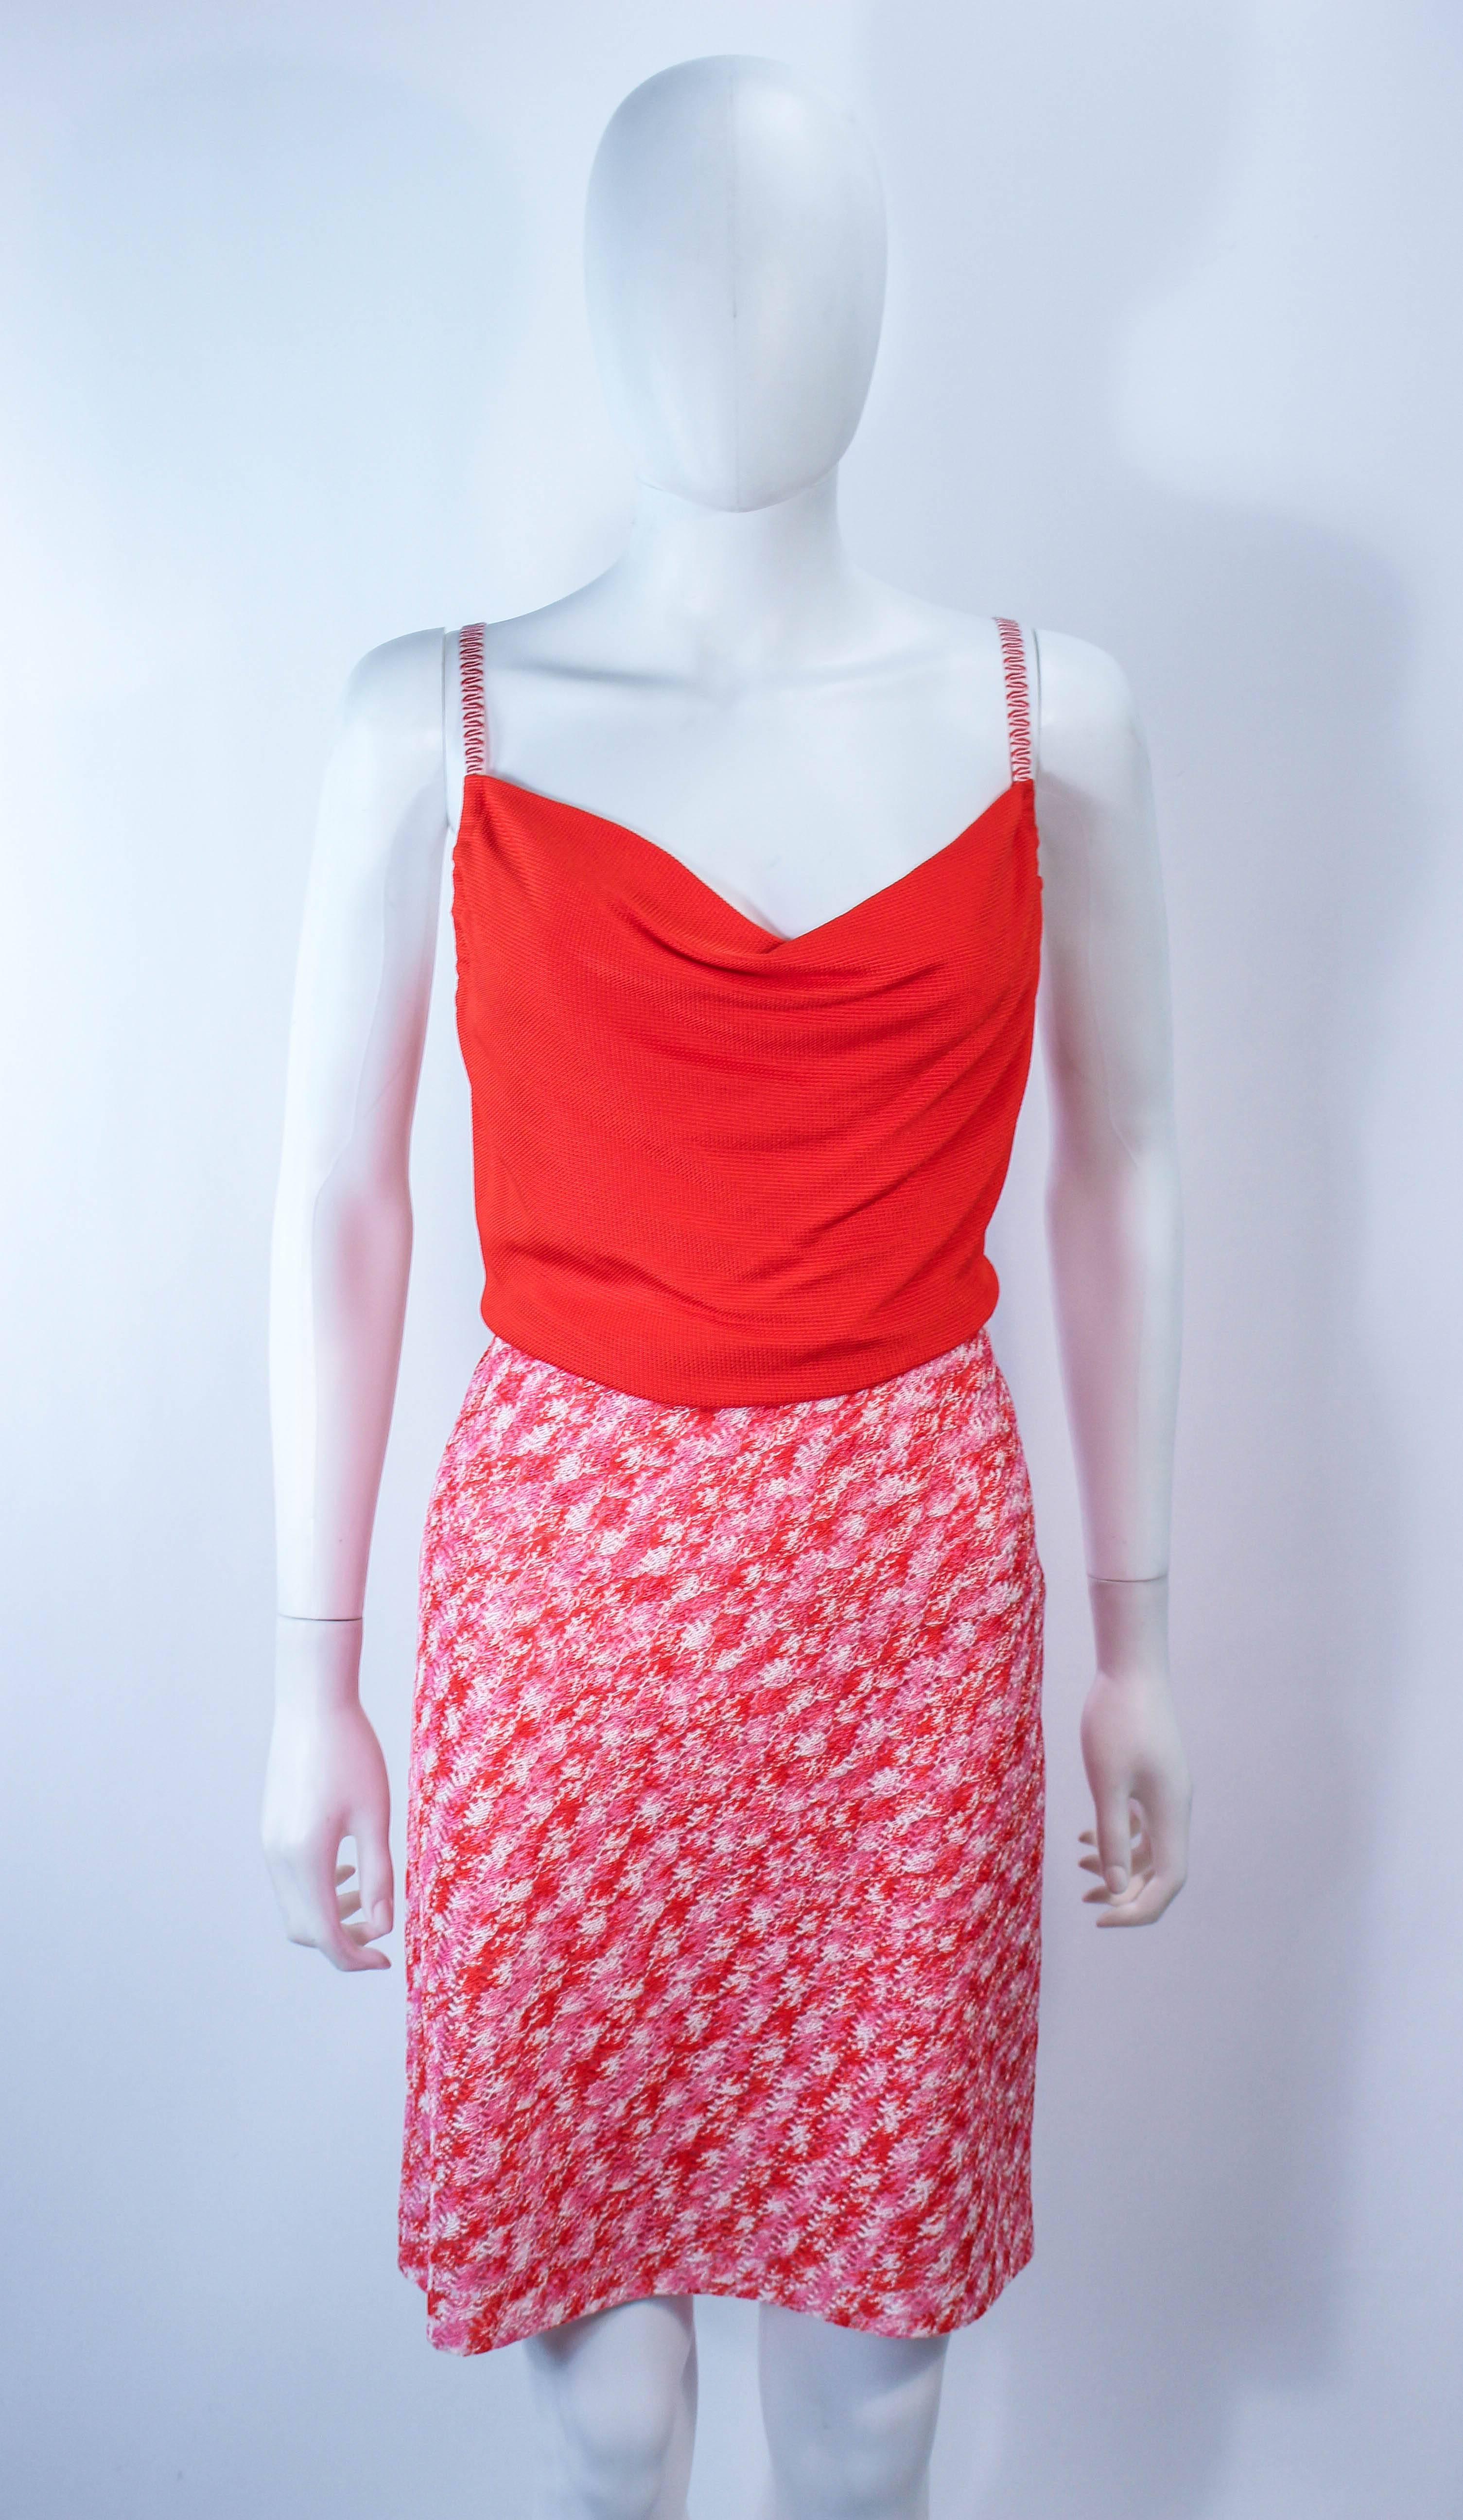 This Missoni set is composed of an orange, pink, and white knit with a space die pattern. The dress has a draped neck and  side zipper closure with snaps. In excellent condition.

**Please cross-reference measurements for personal accuracy. Size in